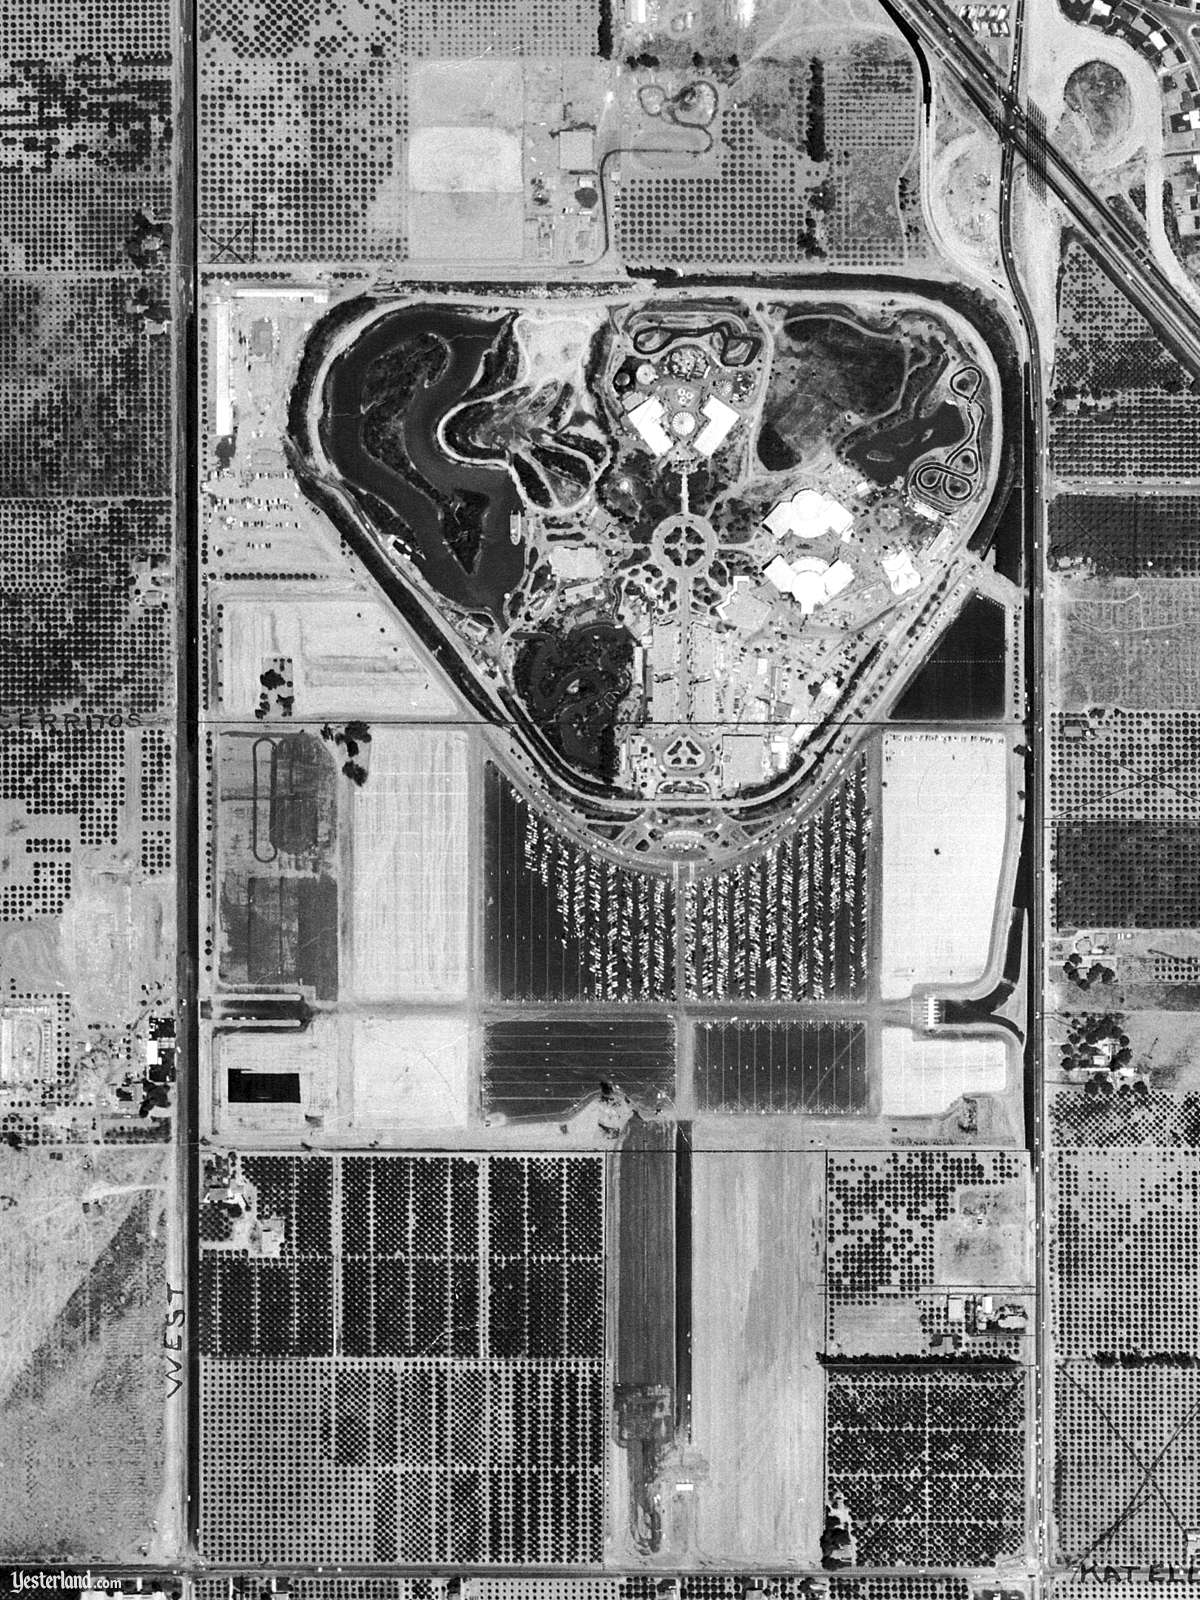 Disneyland from Above on July 15, 1955 (1200 x 1600)